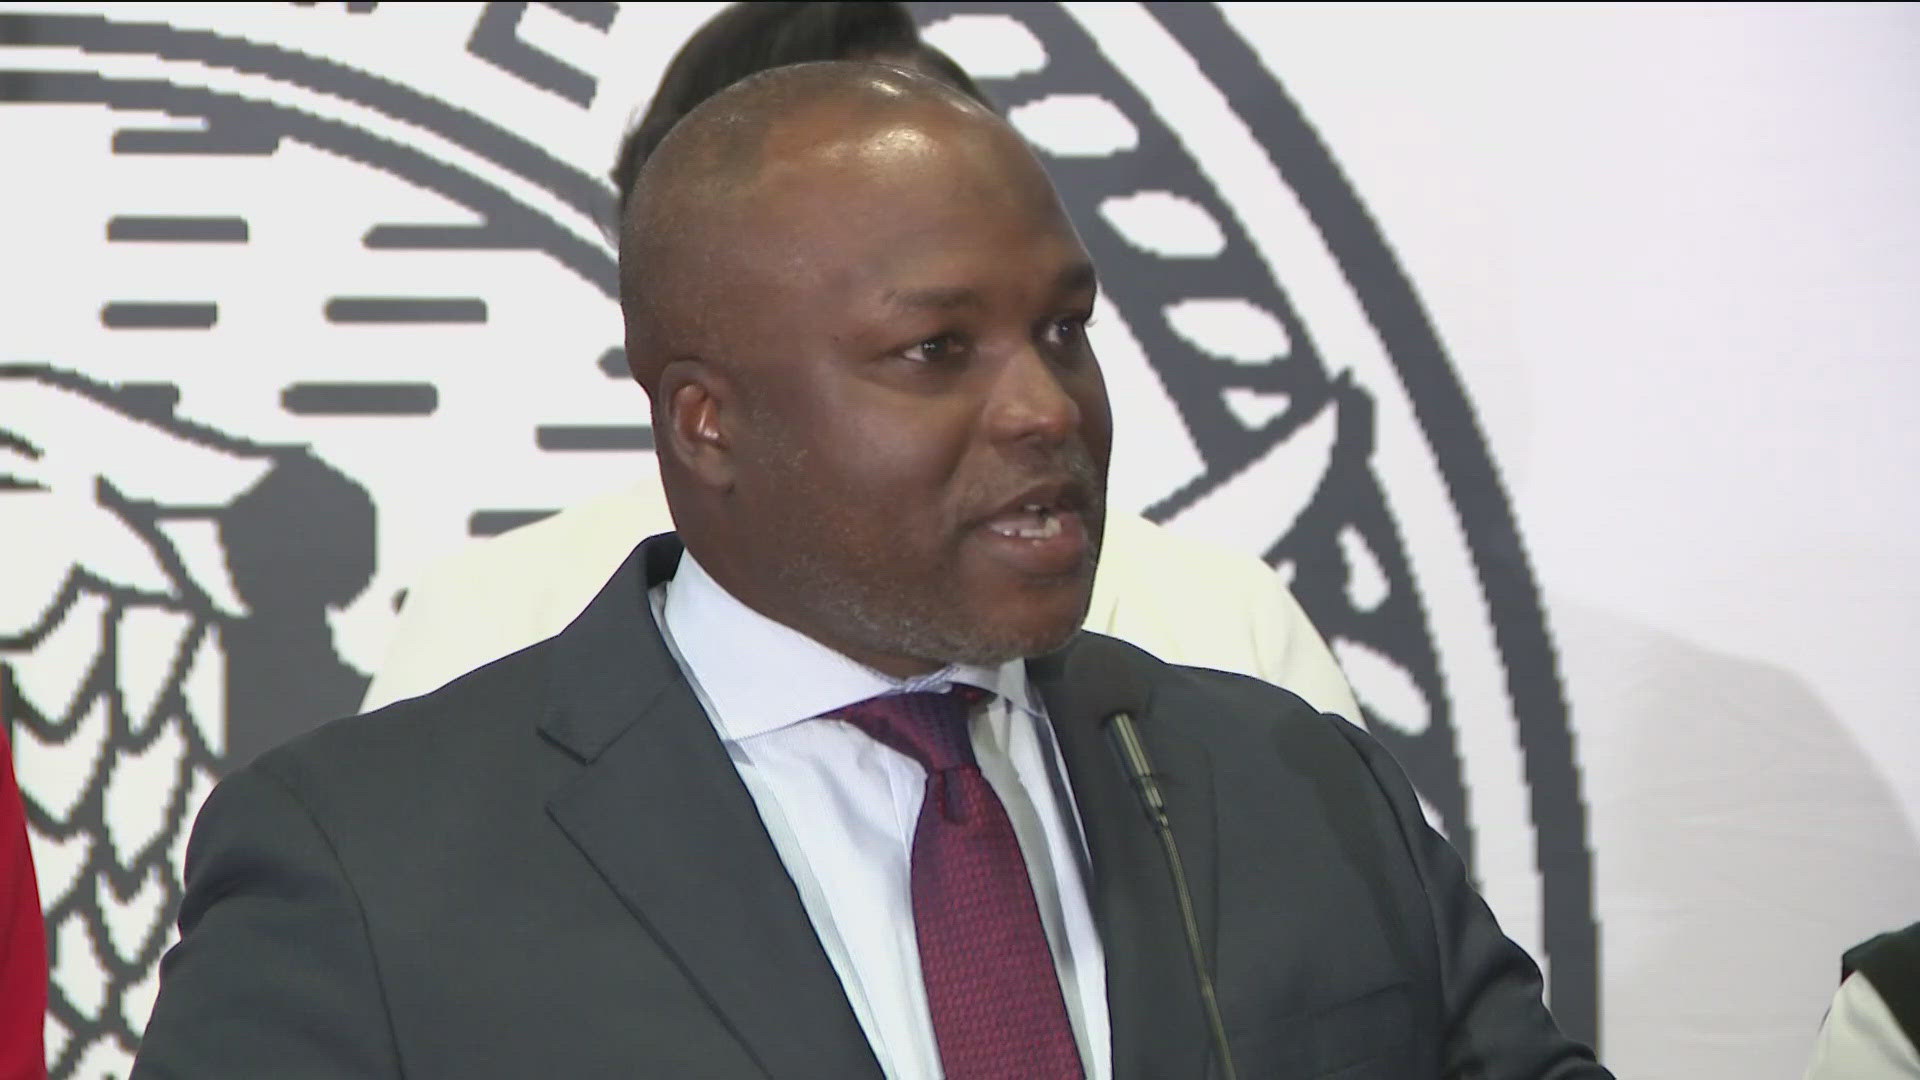 Atlanta Public Schools has announced the sole finalist for the superintendent position. He shared his plans if the school board does approve his hiring.